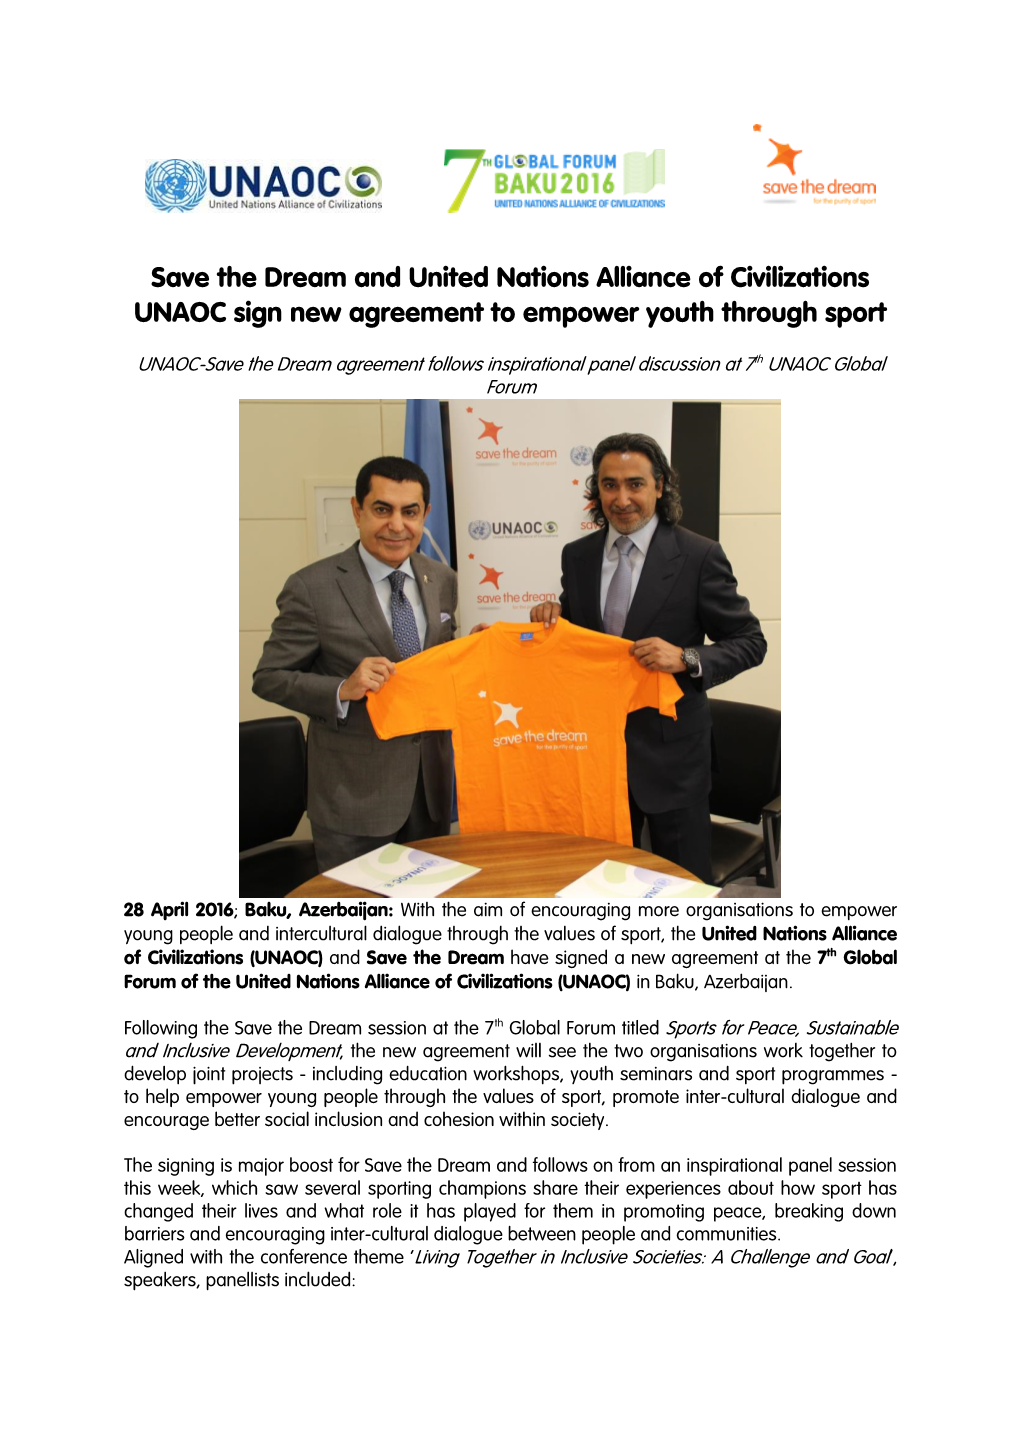 Save the Dream and United Nations Alliance of Civilizations UNAOC Sign New Agreement to Empower Youth Through Sport